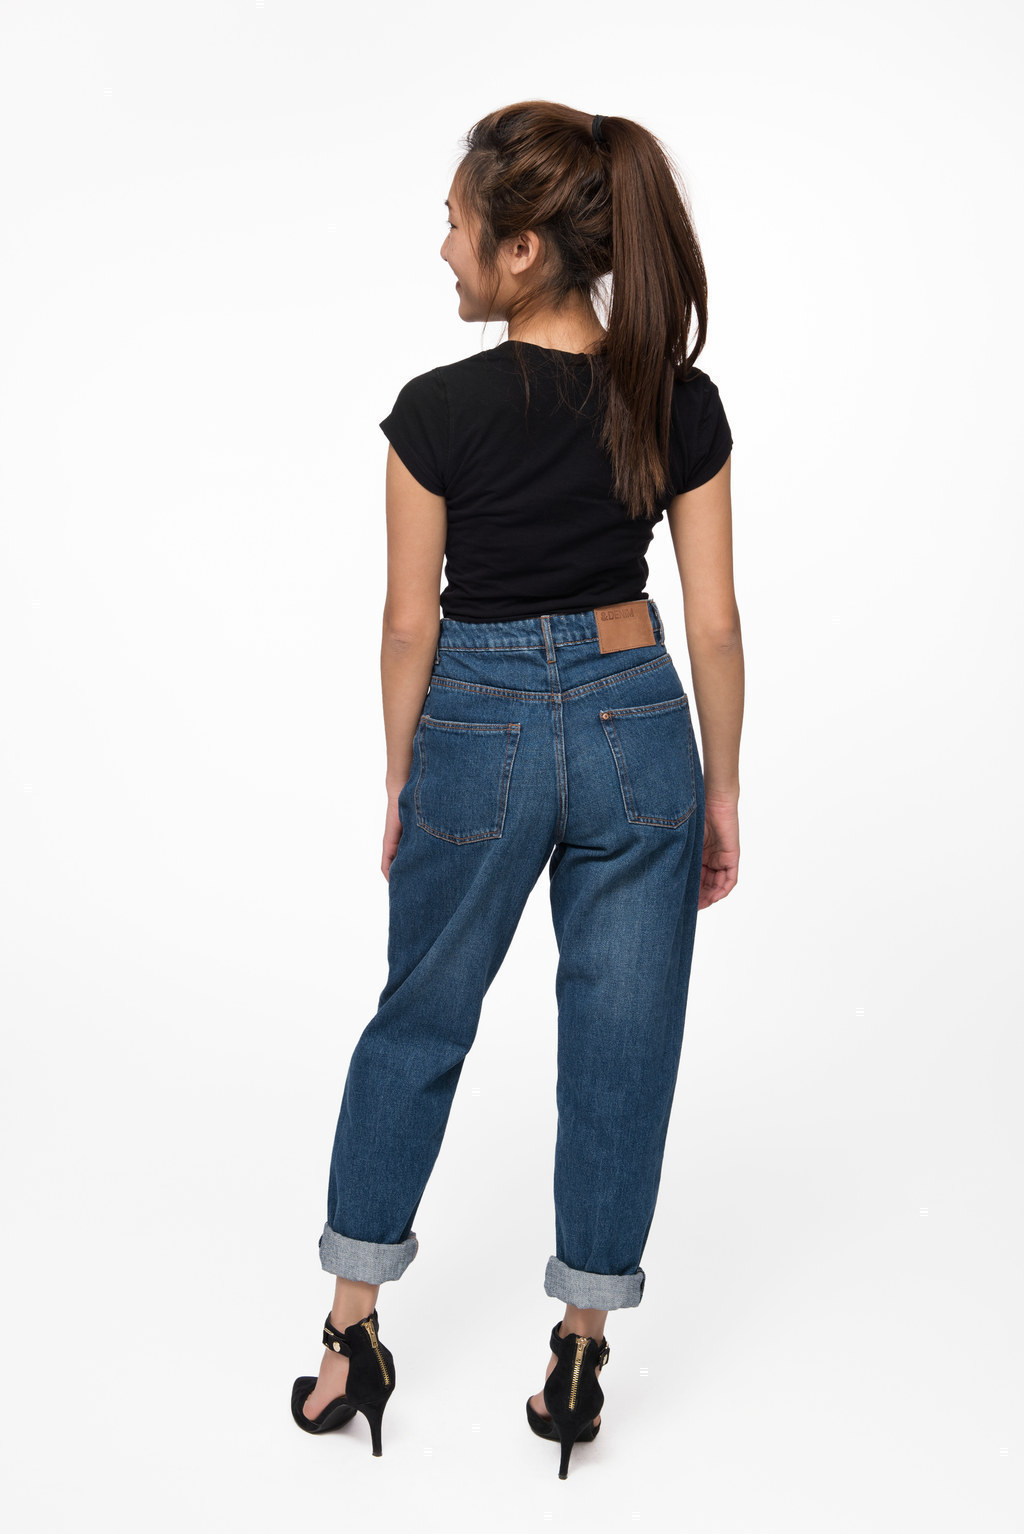 mom jeans small waist big thighs